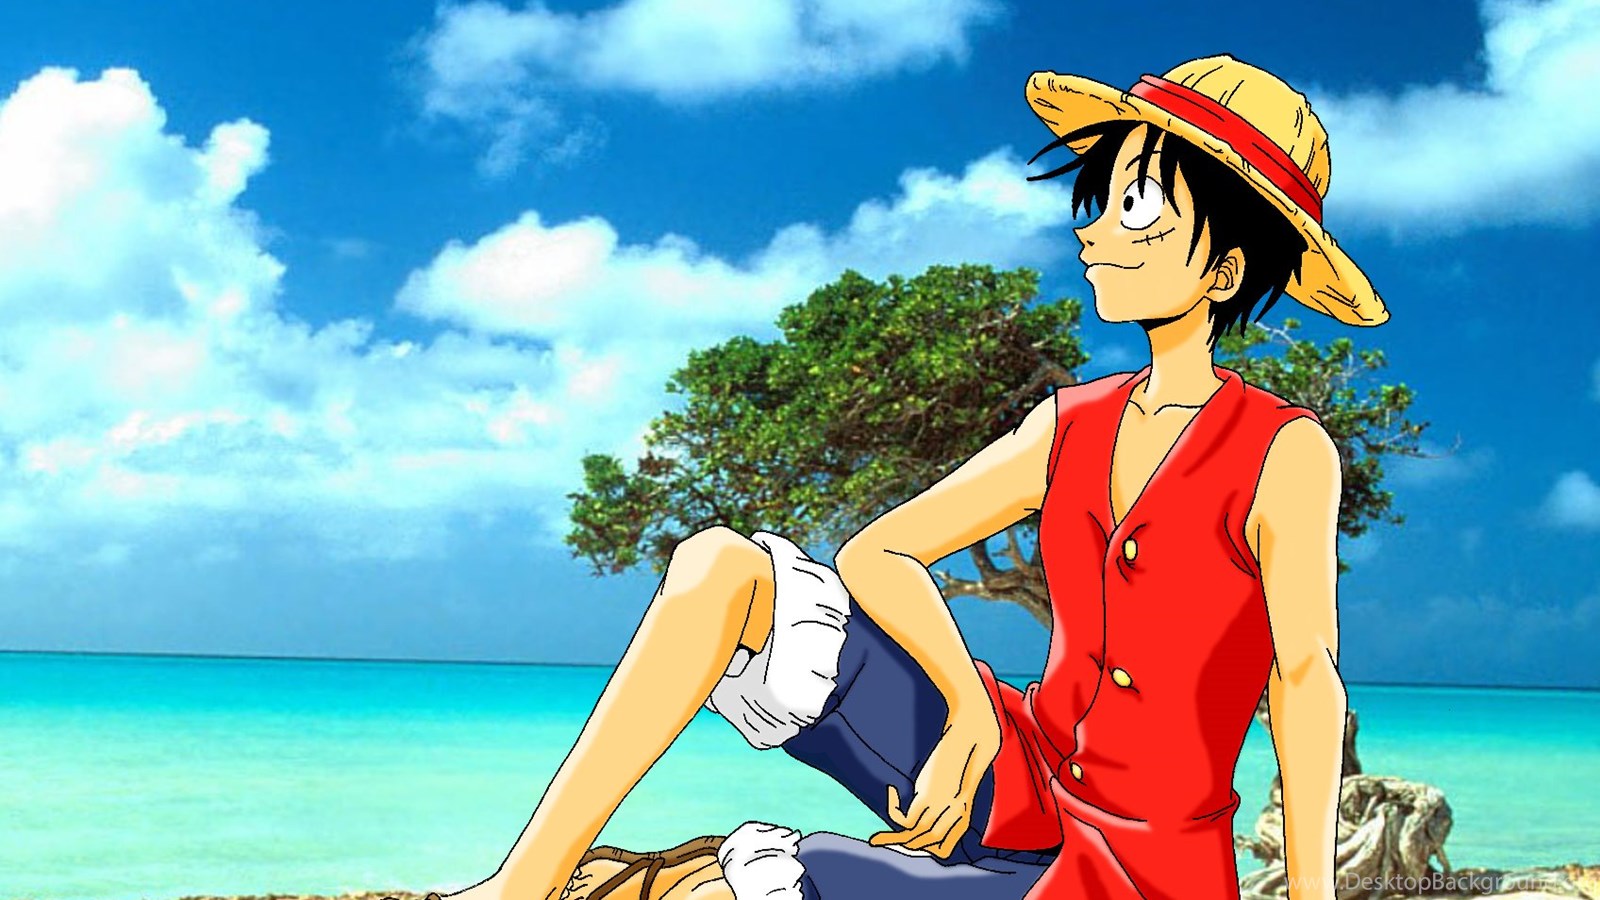 Luffy Anime Wallpapers - Wallpaper Cave